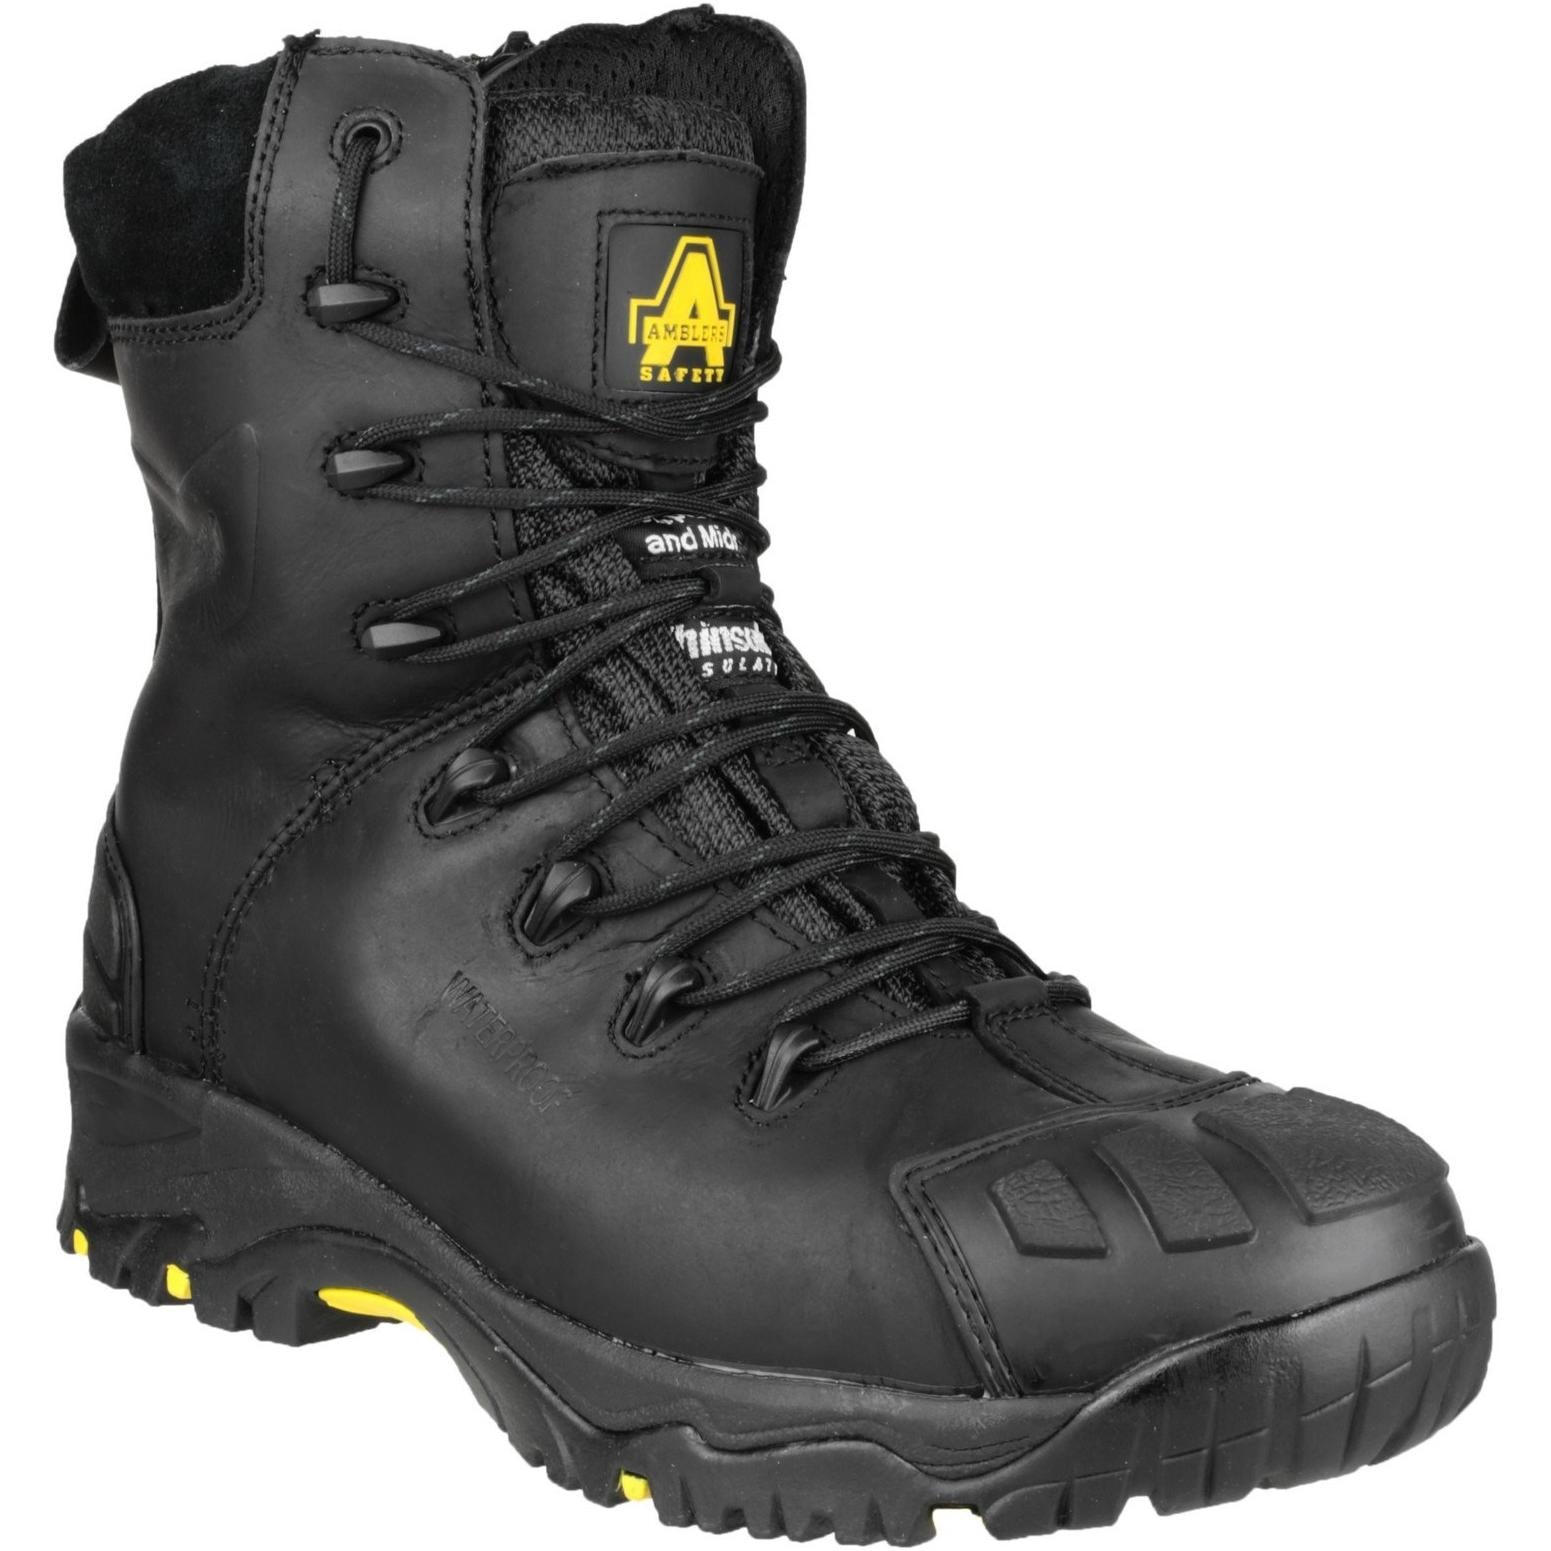 Amblers Safety FS999 Hi Leg Composite Safety Boot With Side Zip